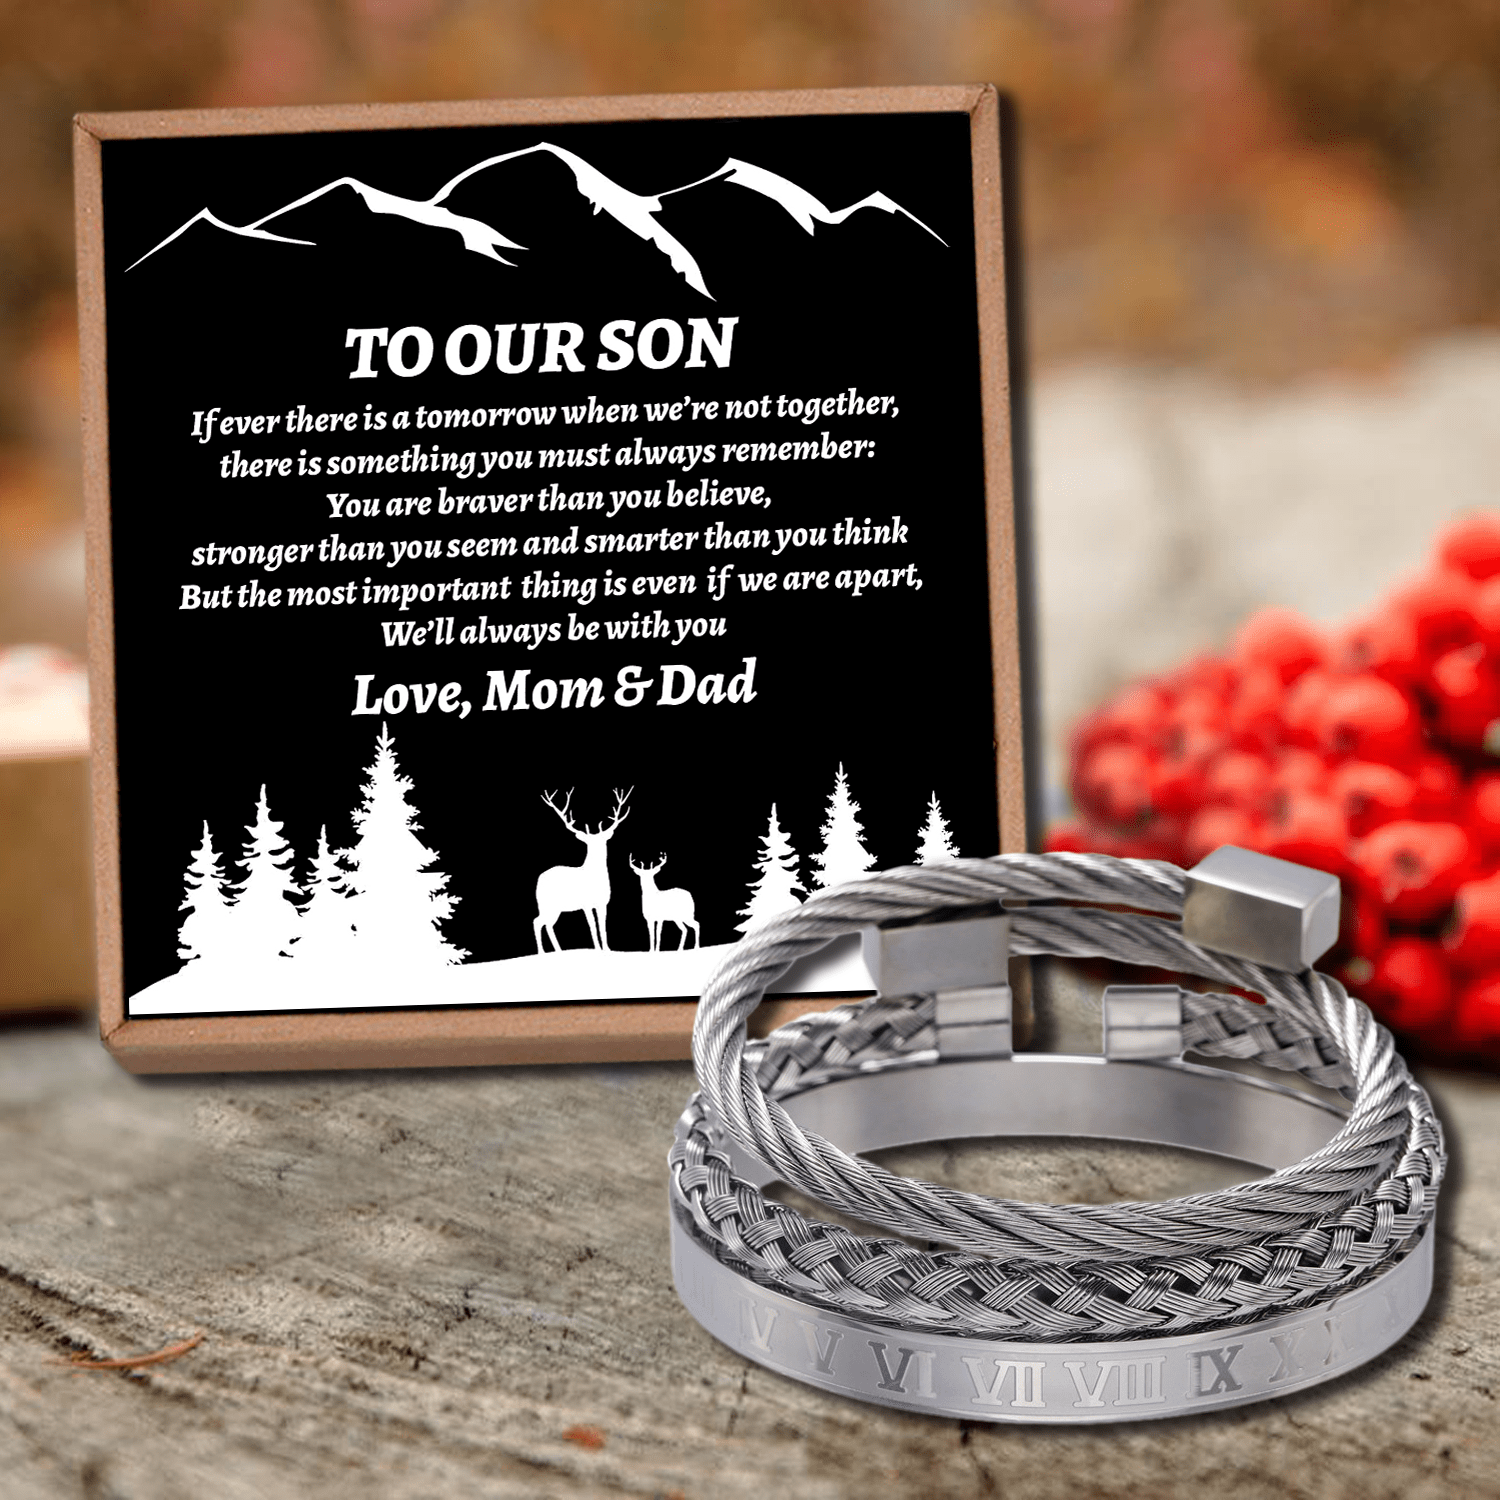 Bracelets To Our Son - I Will Always Be With You Roman Numeral Bangle Weave Bracelets Set GiveMe-Gifts